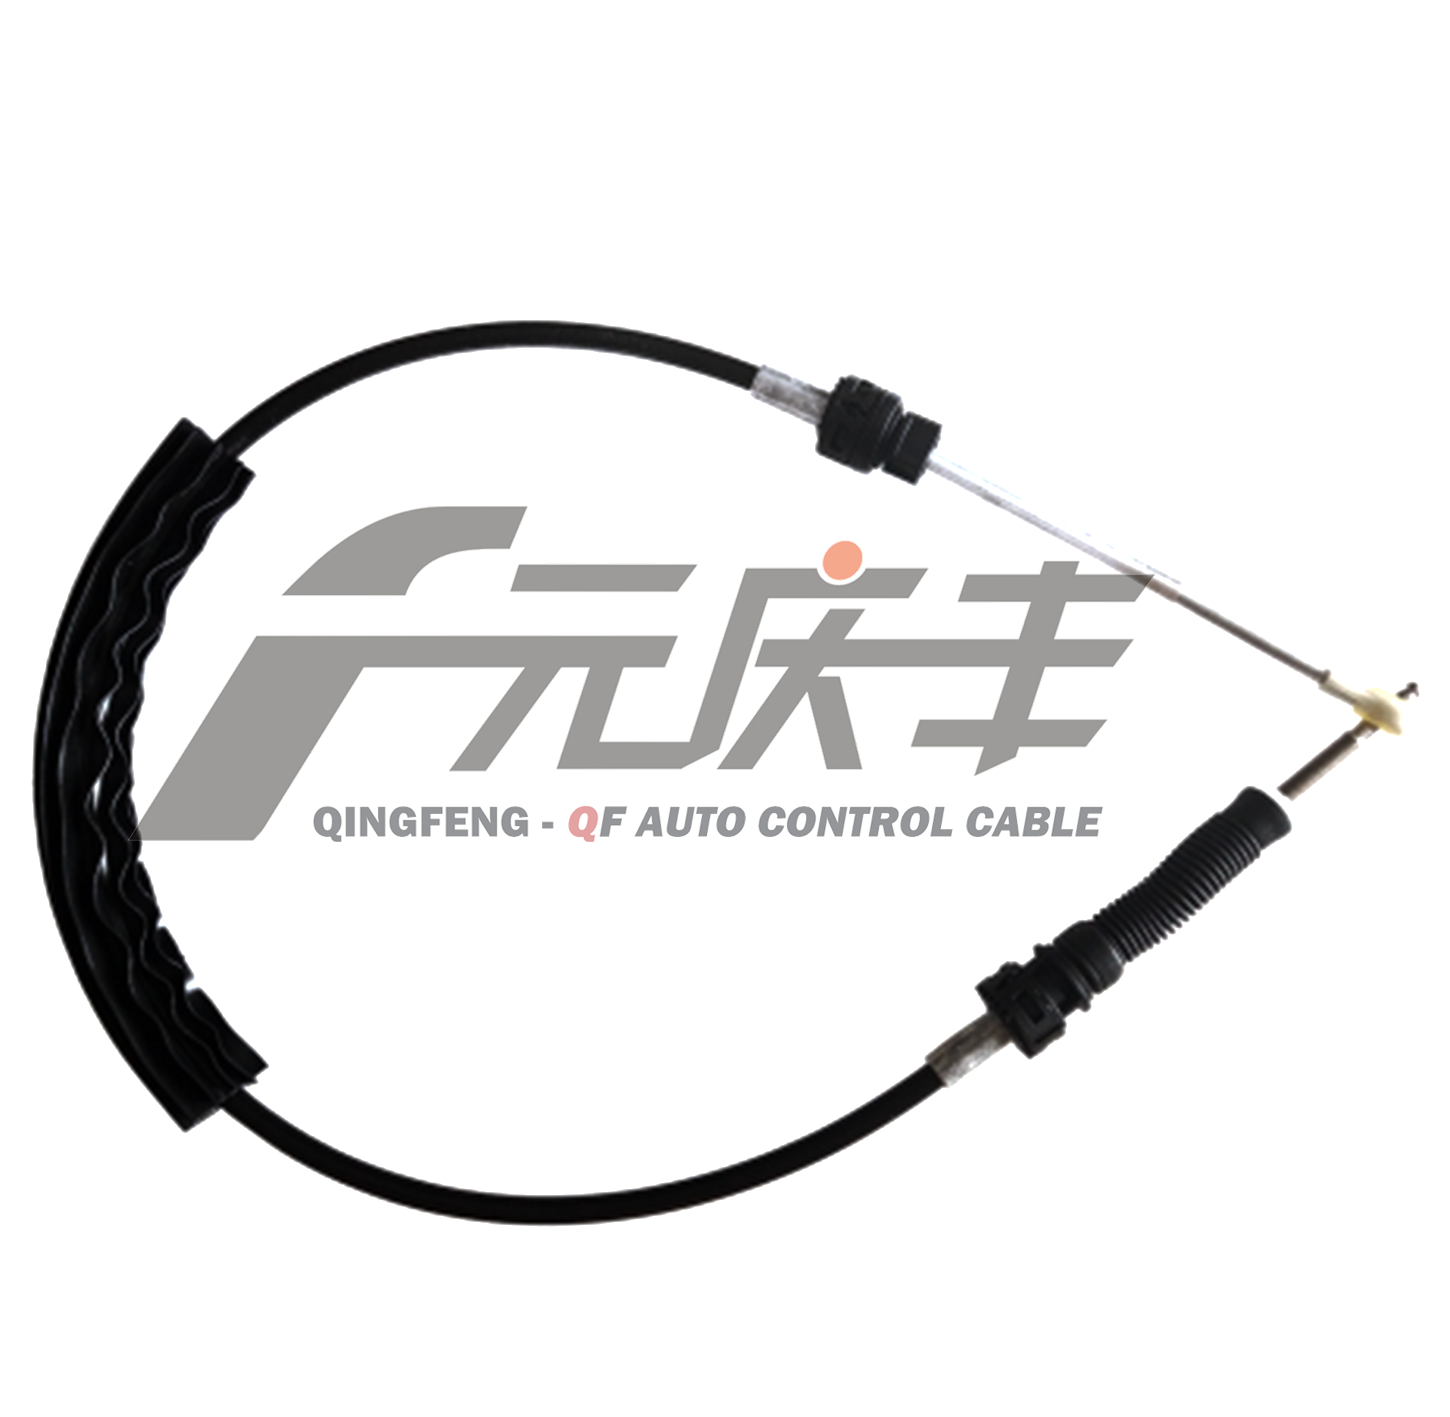 6Q0 711 265AA gear shift cable transmission cable for Polo